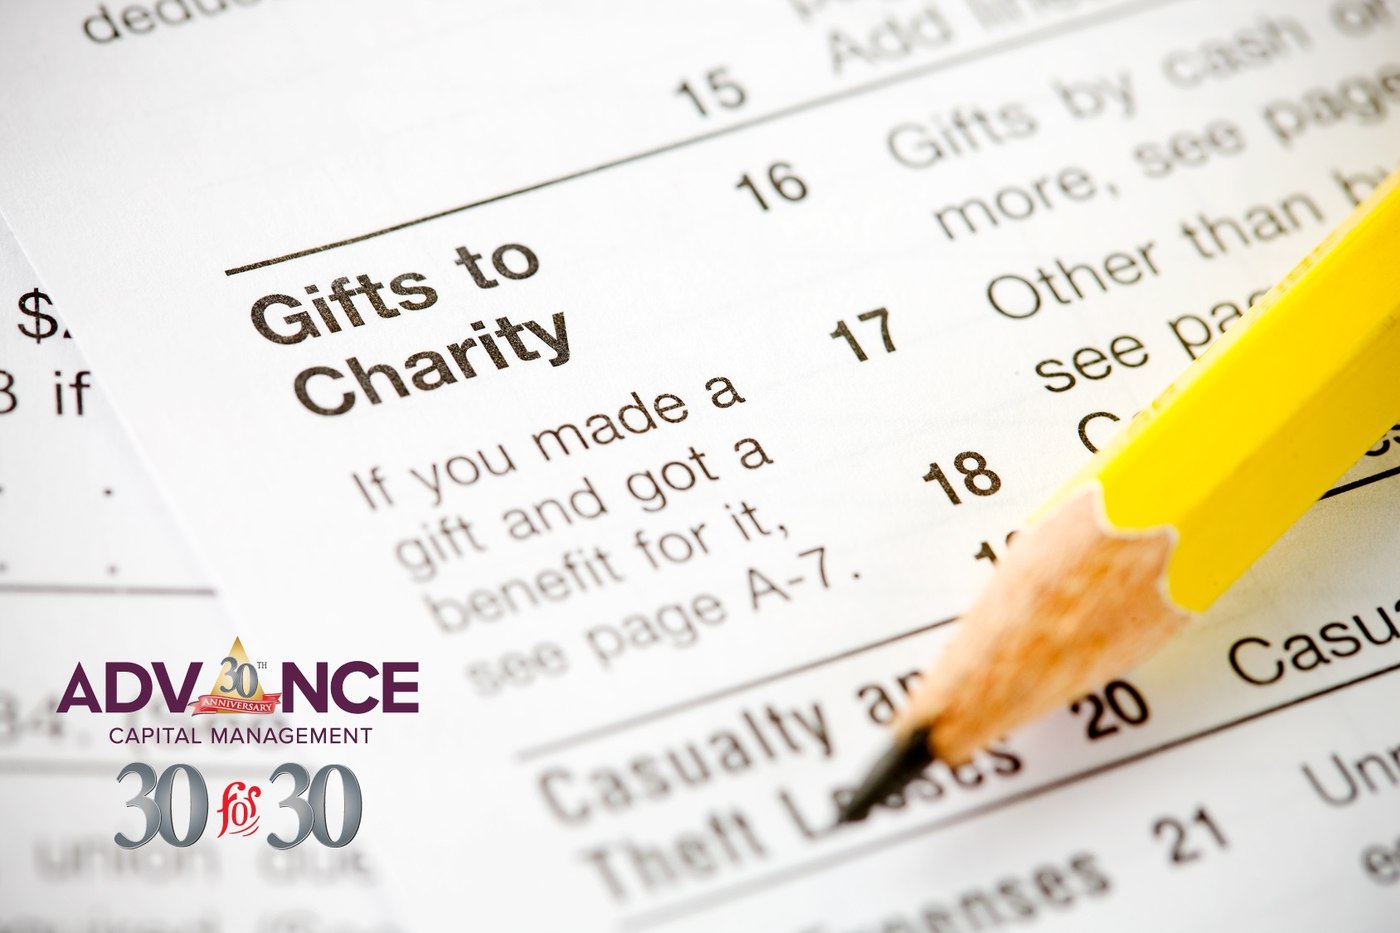 What to Know About Charitable Gifts - image.jpg